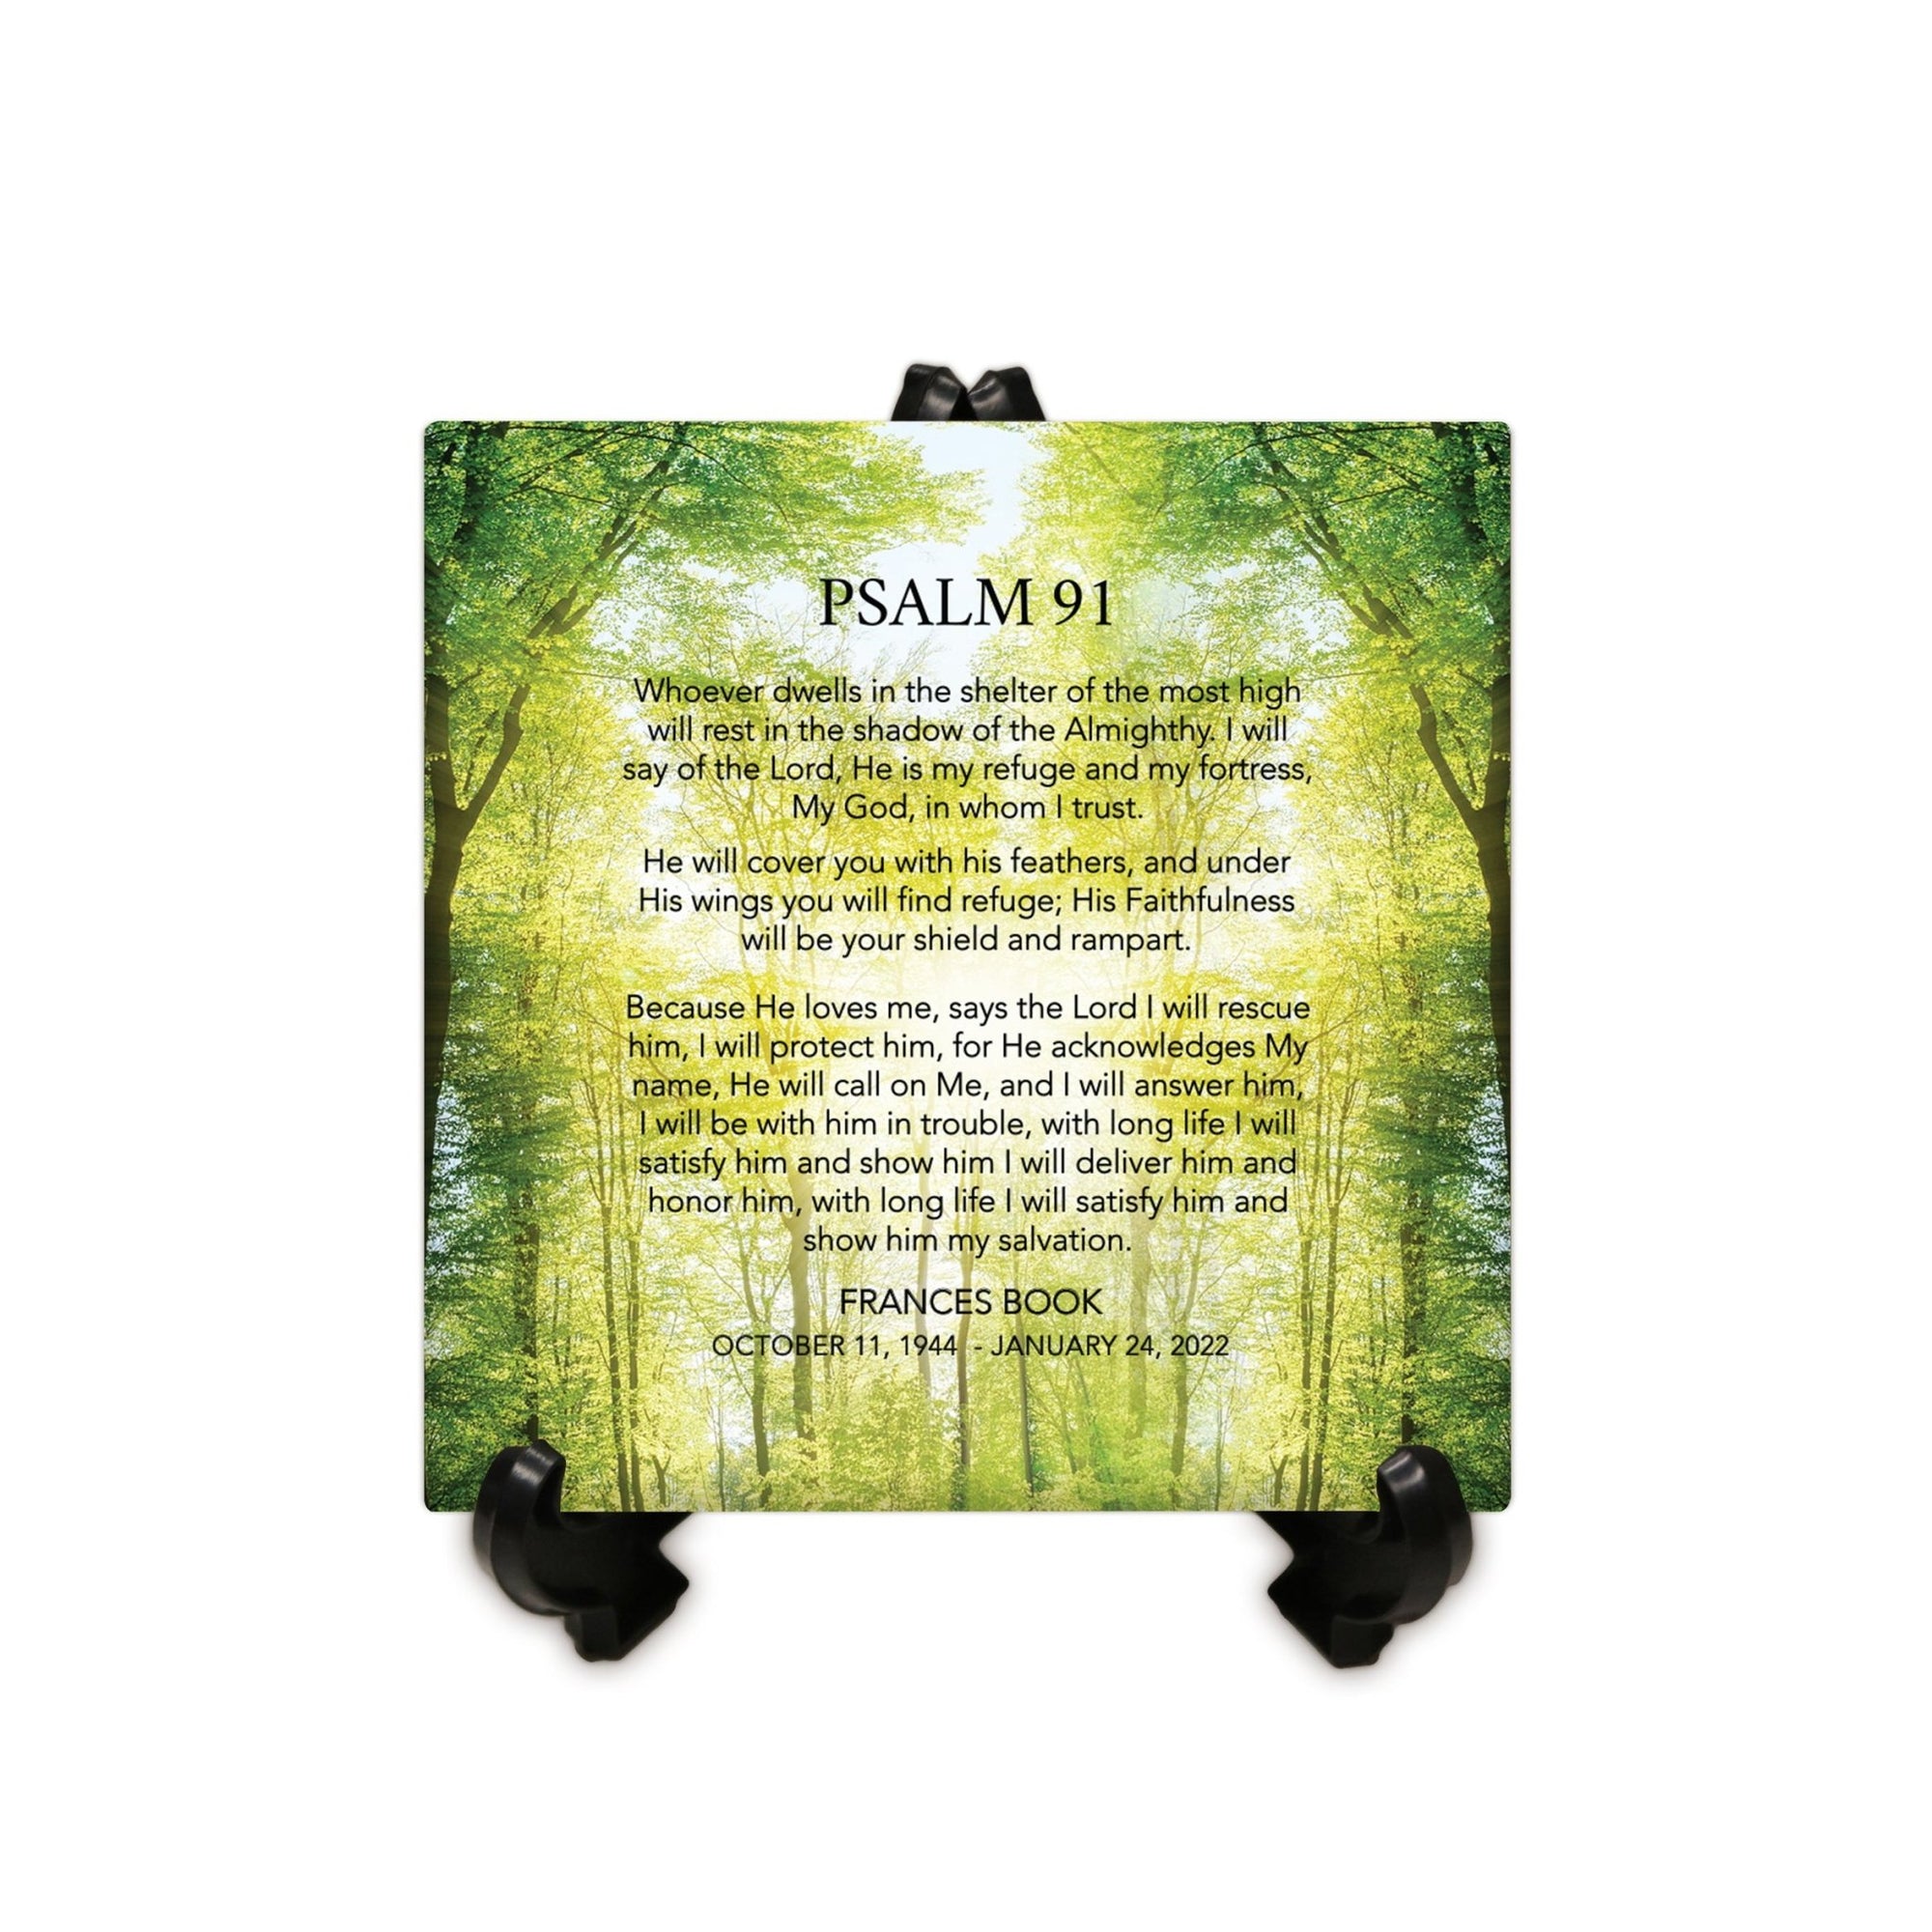 Personalized Memorial Ceramic Trivet with Stand for Home Decor - Psalm 91 - LifeSong Milestones